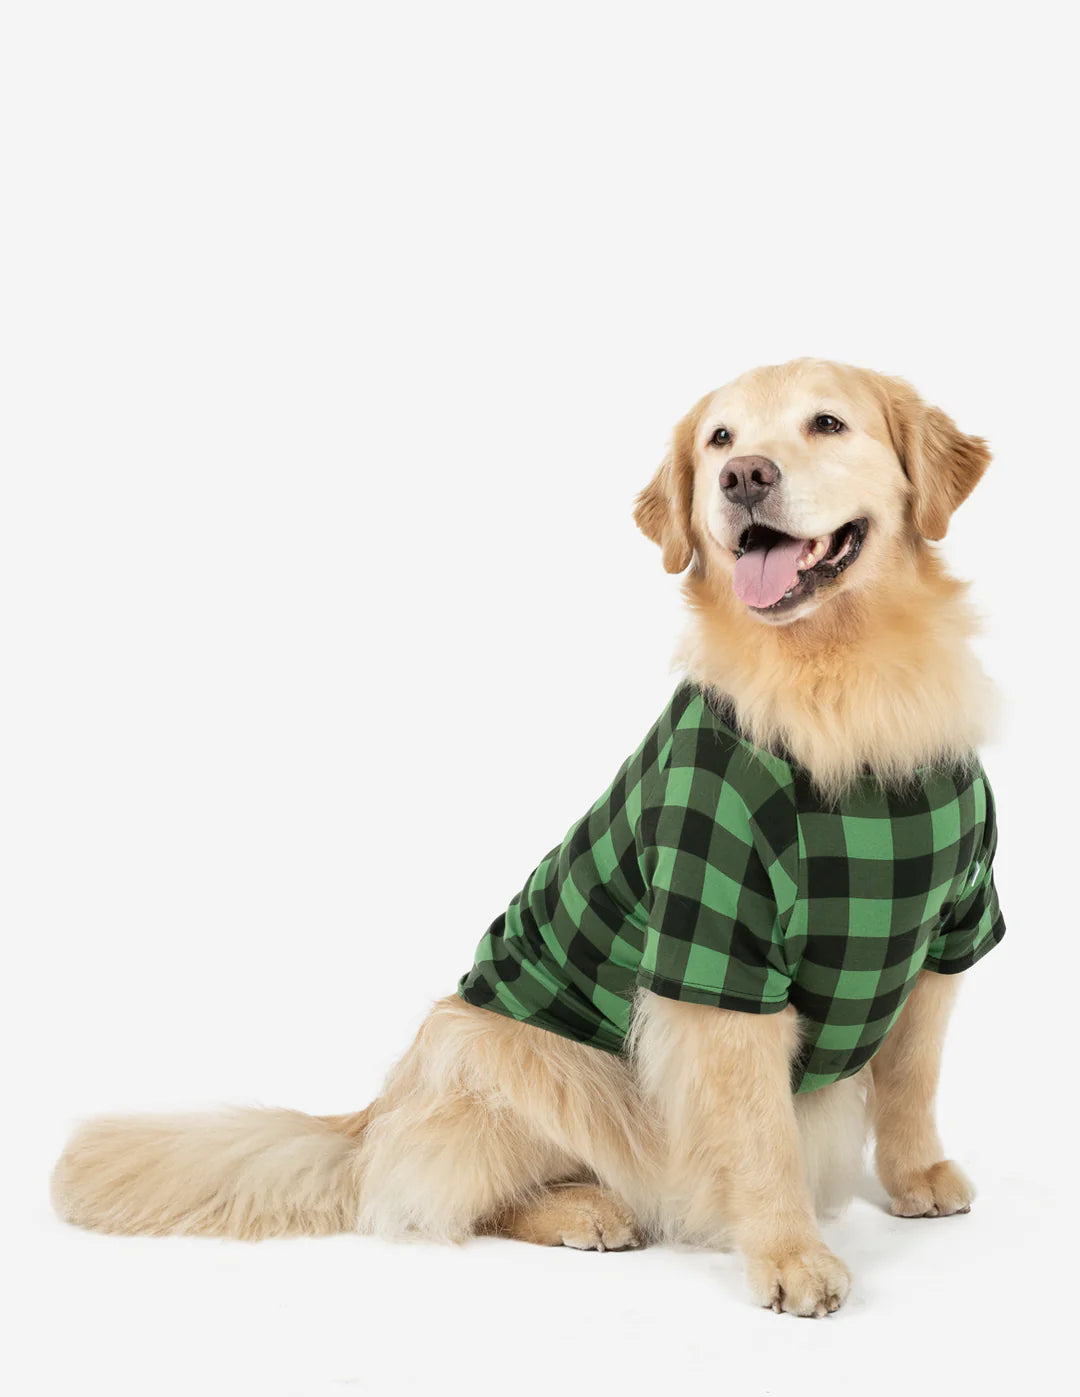 Embrace Comfort and Style with Plaid Dog Pajamas by Leveret.